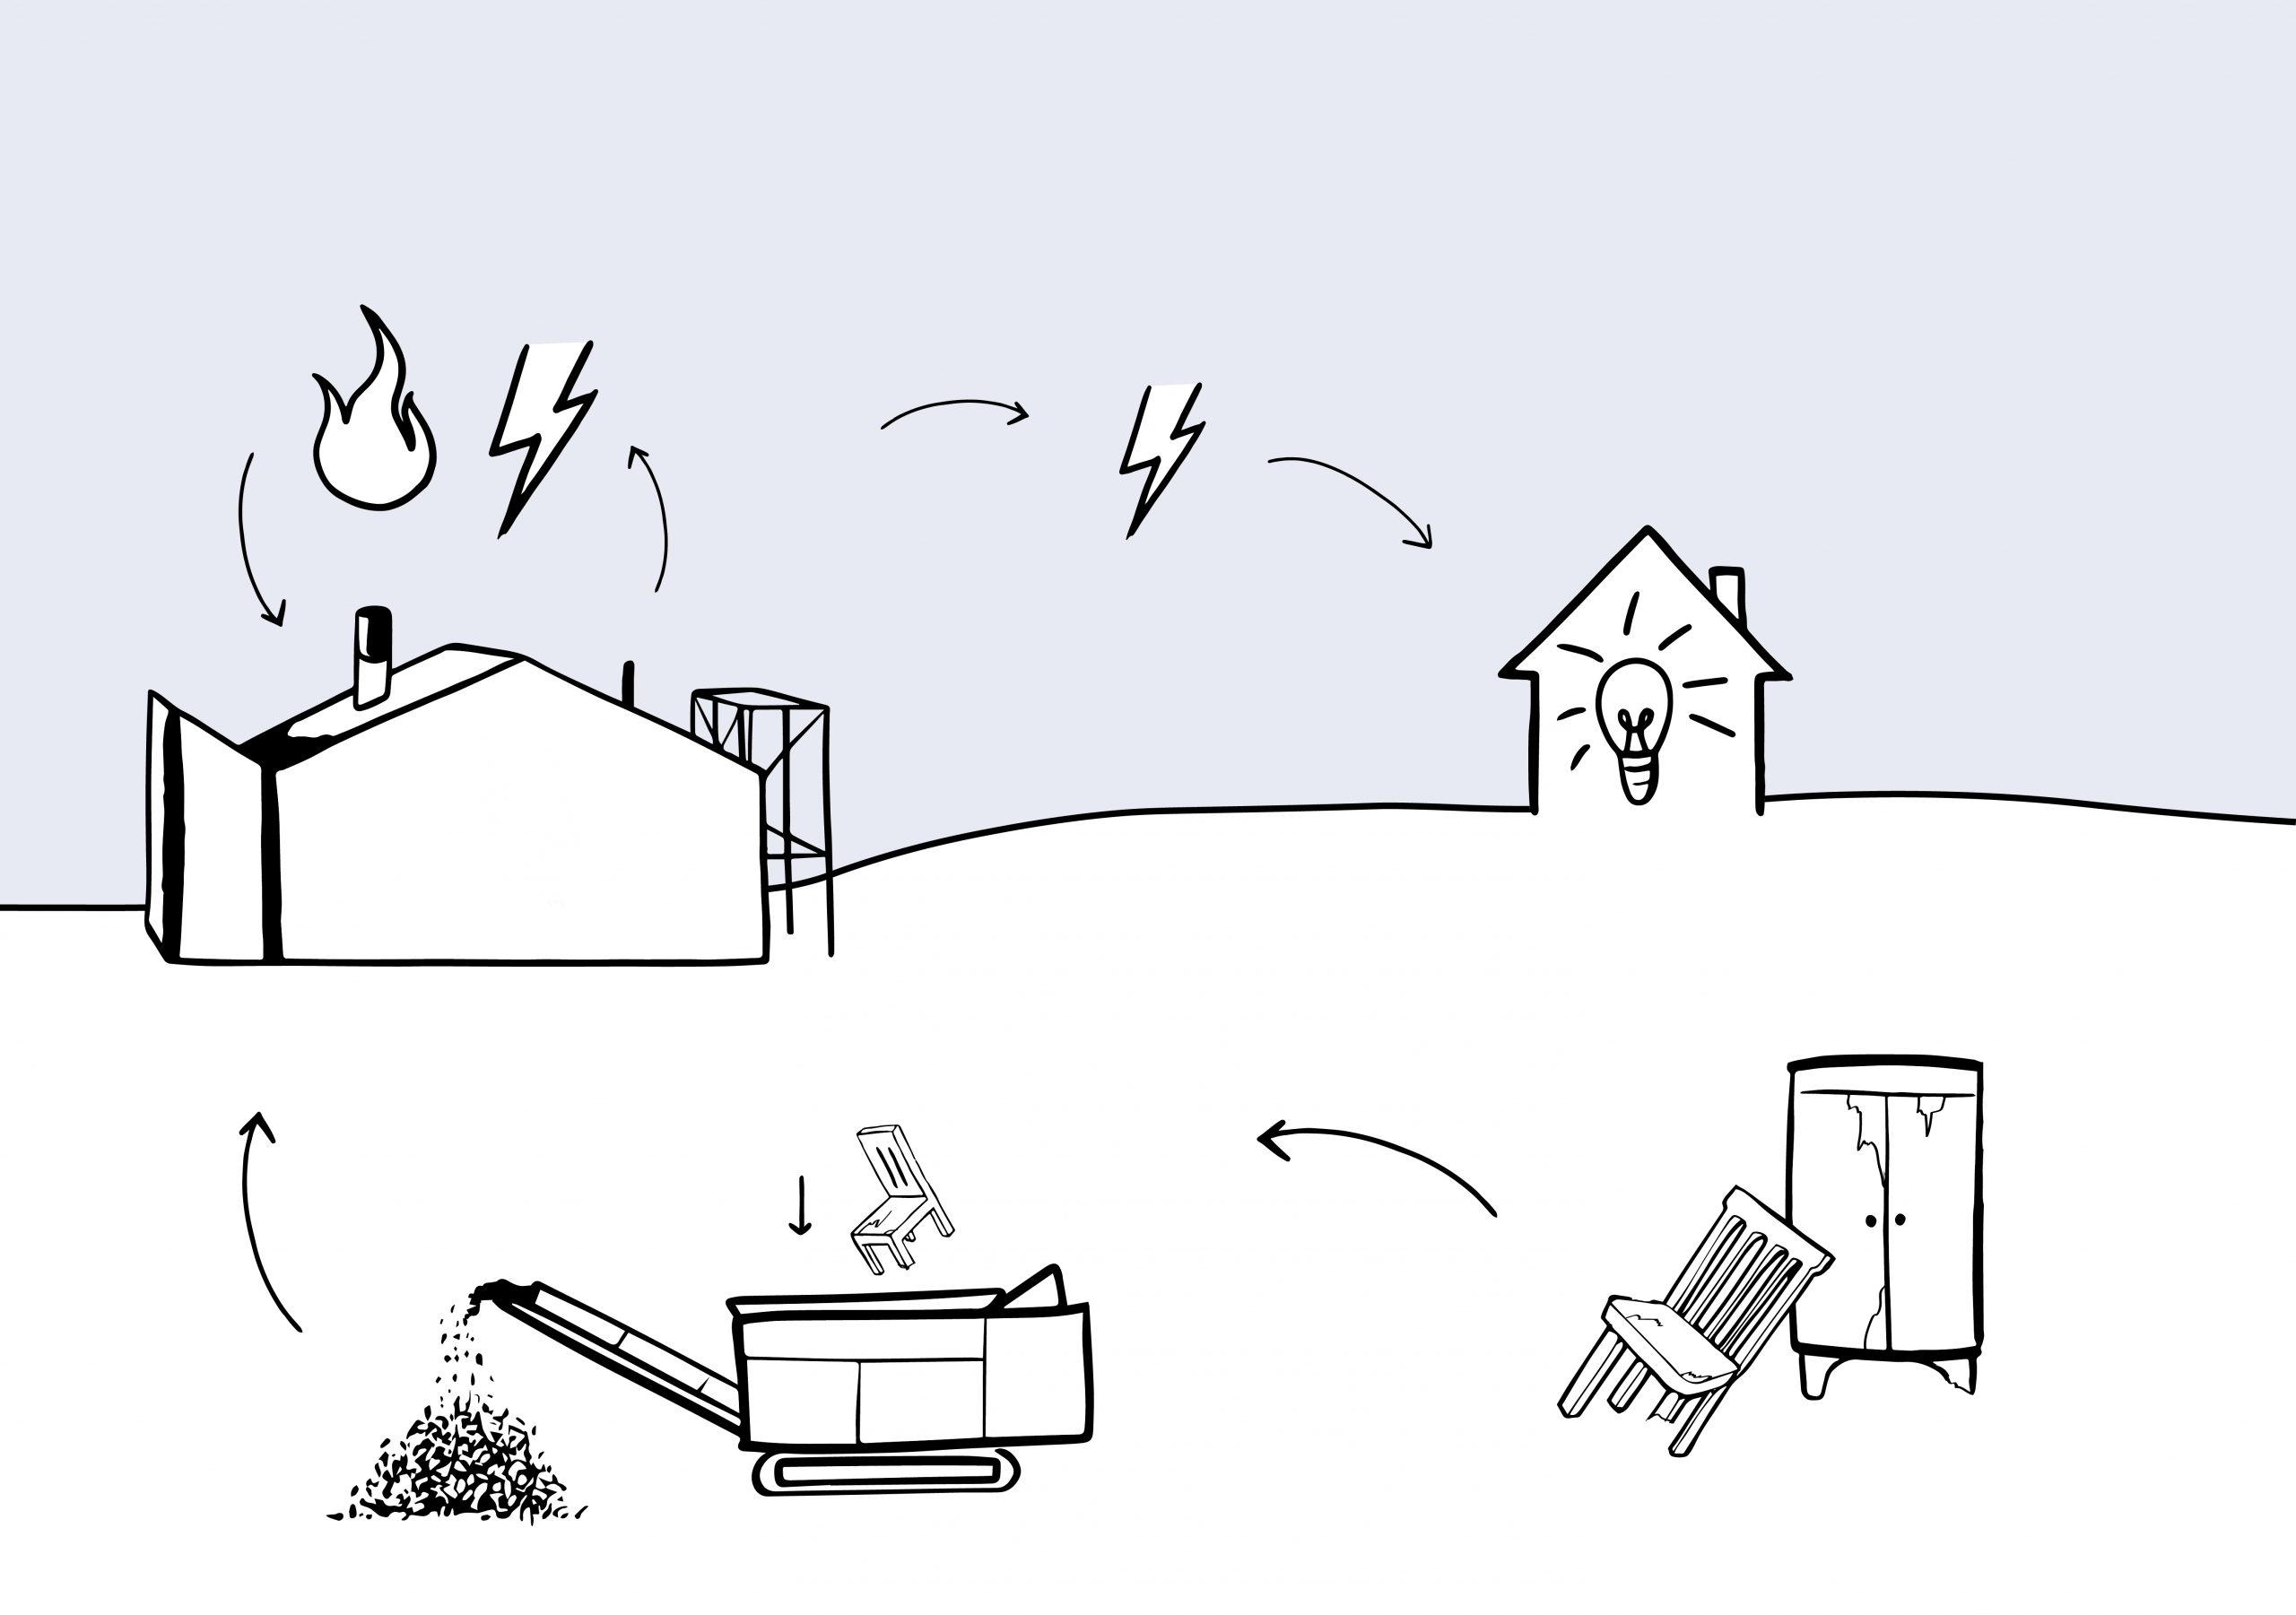 image shows an illustration of the wood waste recycling process